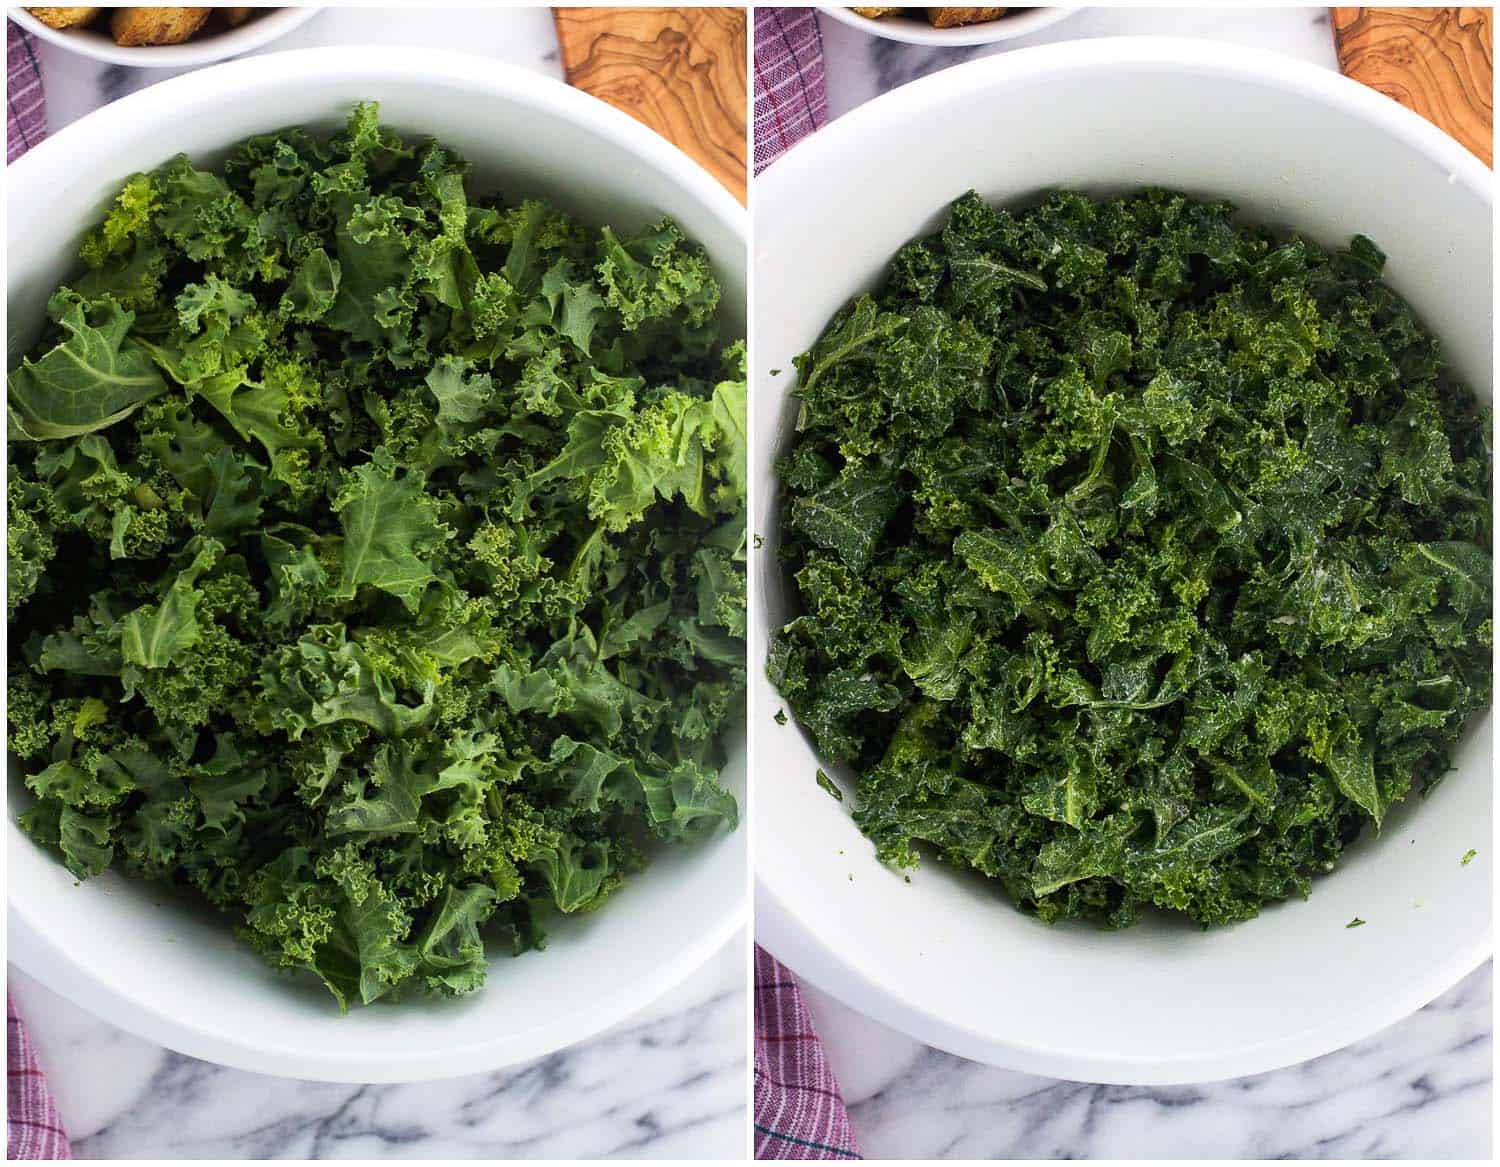 An overhead side-by-side shot of kale leaves in a large mixing bowl on the left, and kale after being massaged and reduced in size on the right.